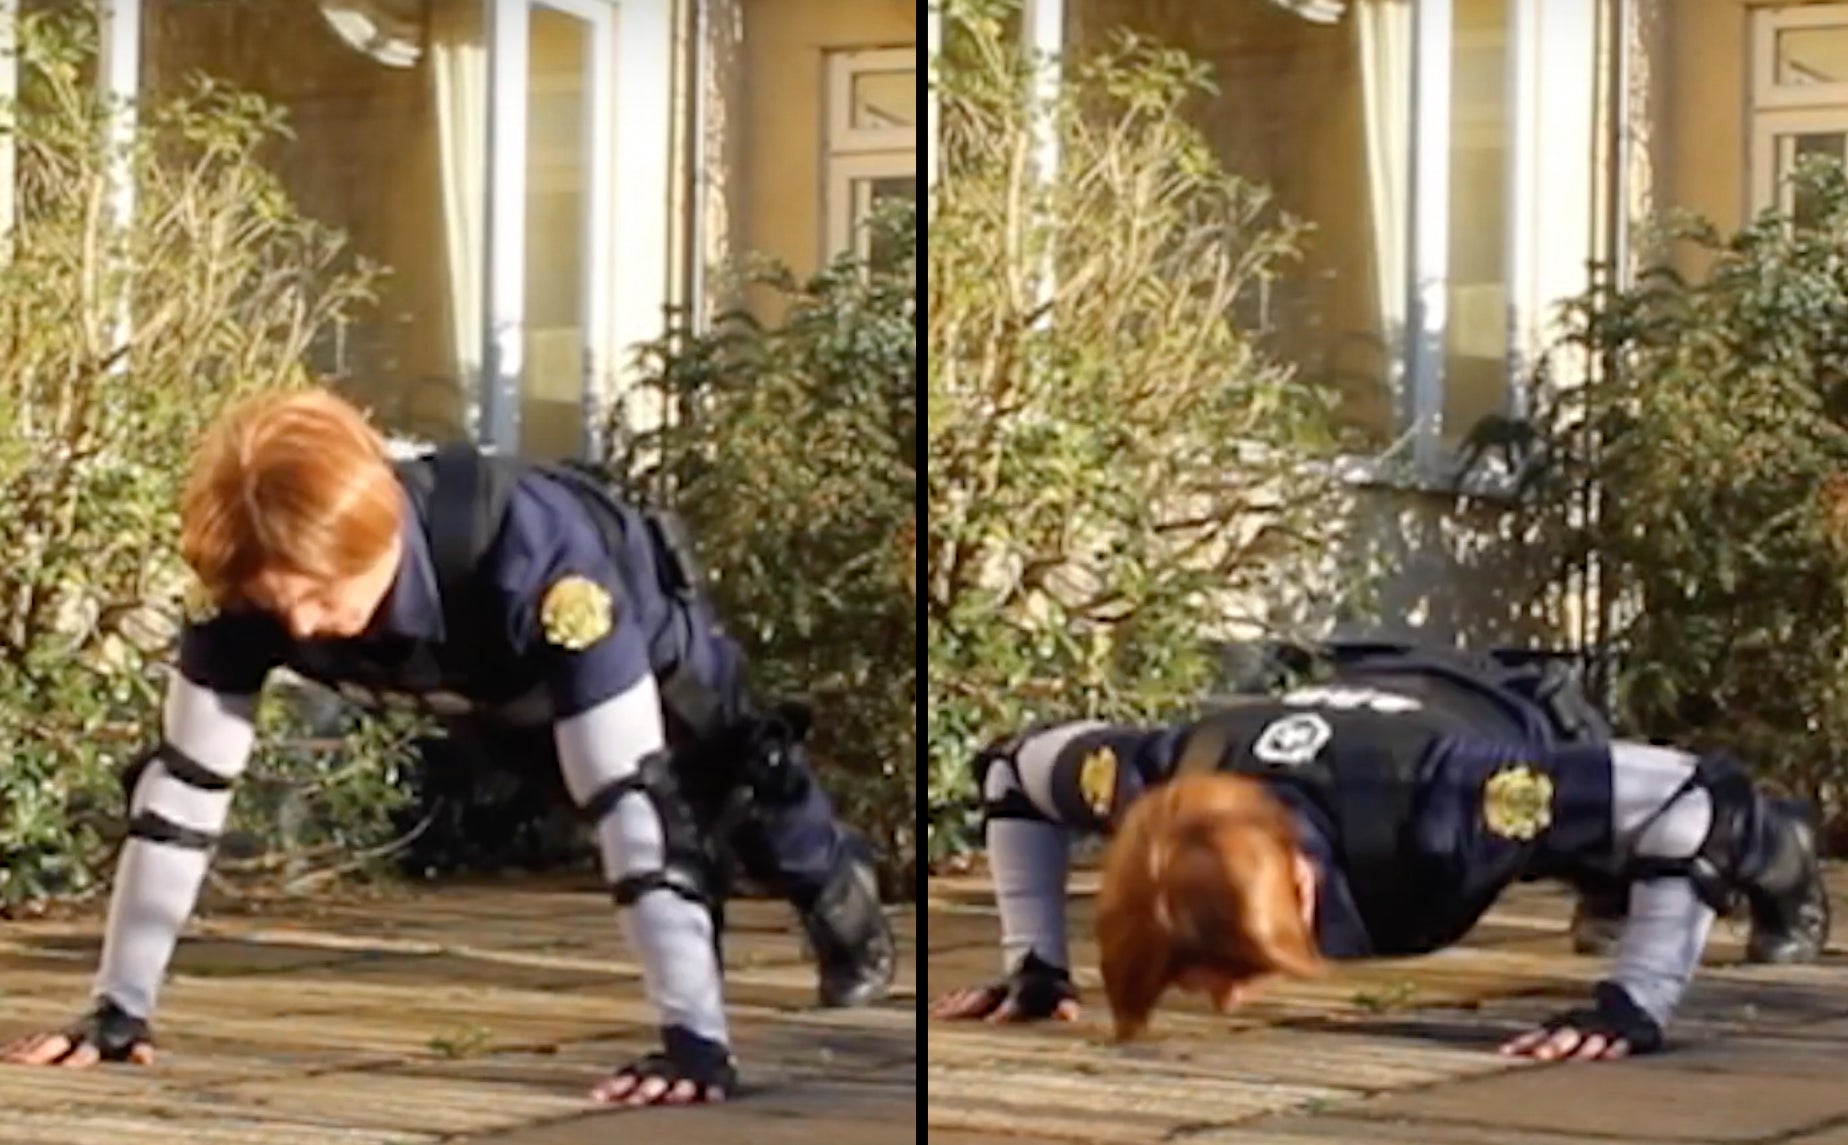 Leon S. Kennedy Resident Evil 2 Remake cosplay teaching the push up for a raccoon city fitness workout